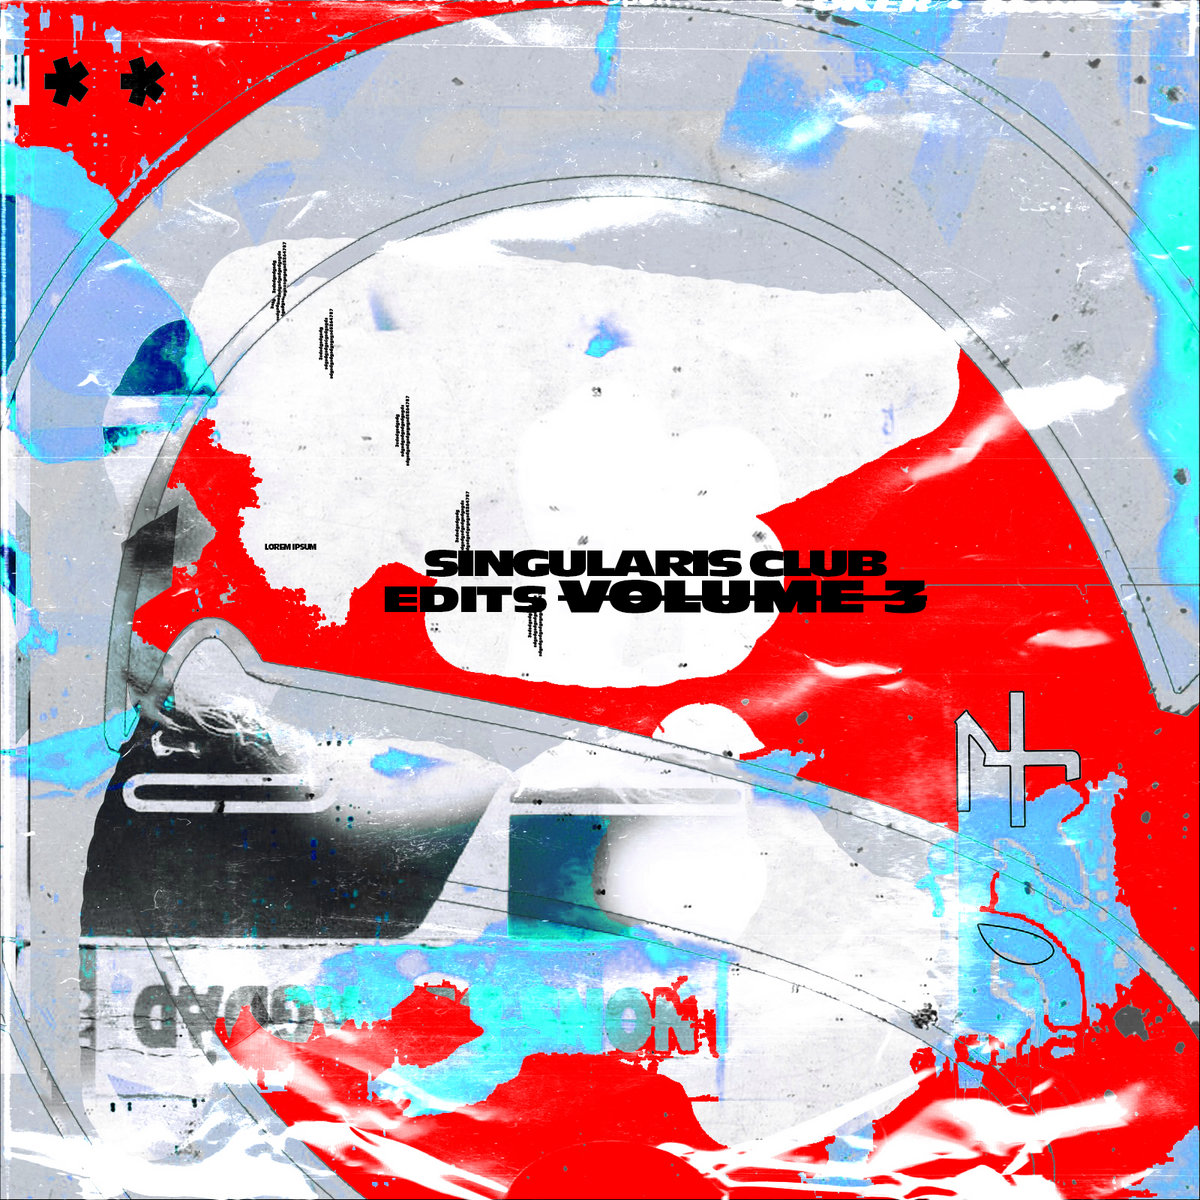 Singularis unleashes another batch of remixes on "Club edits Vol. 3"